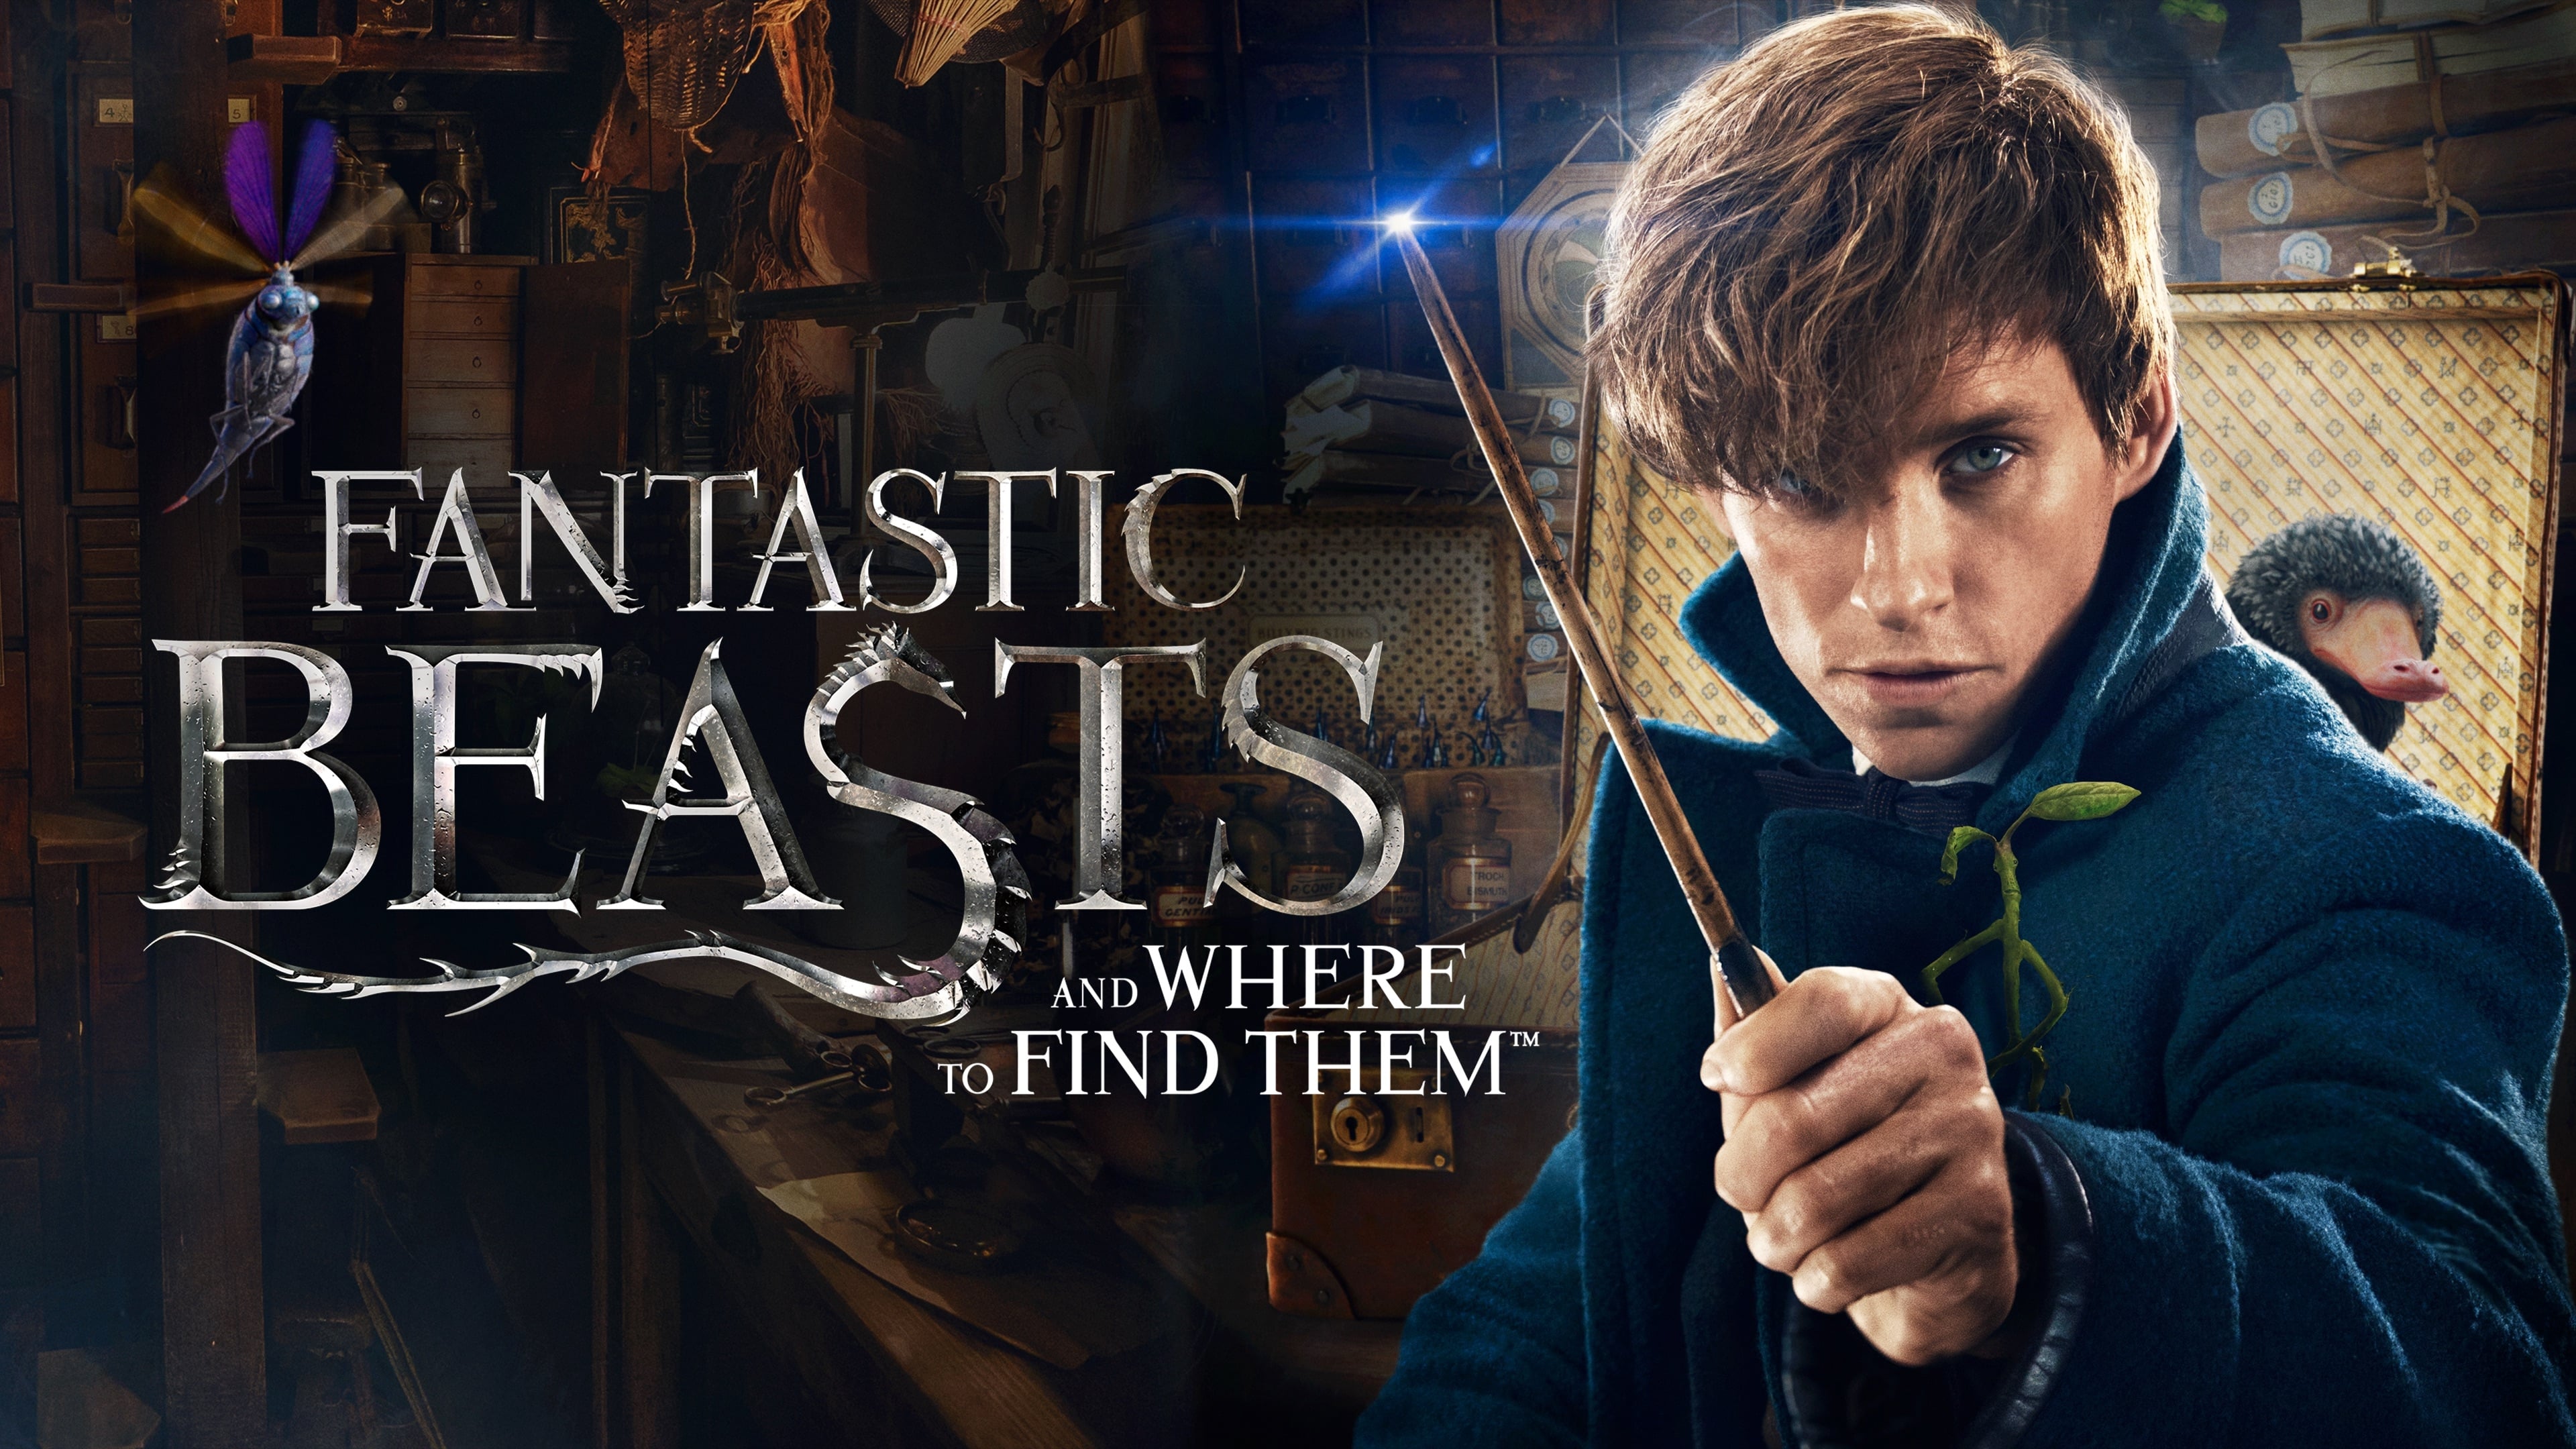 Fantastic Beasts and Where to Find Them 4k Ultra HD Wallpaper